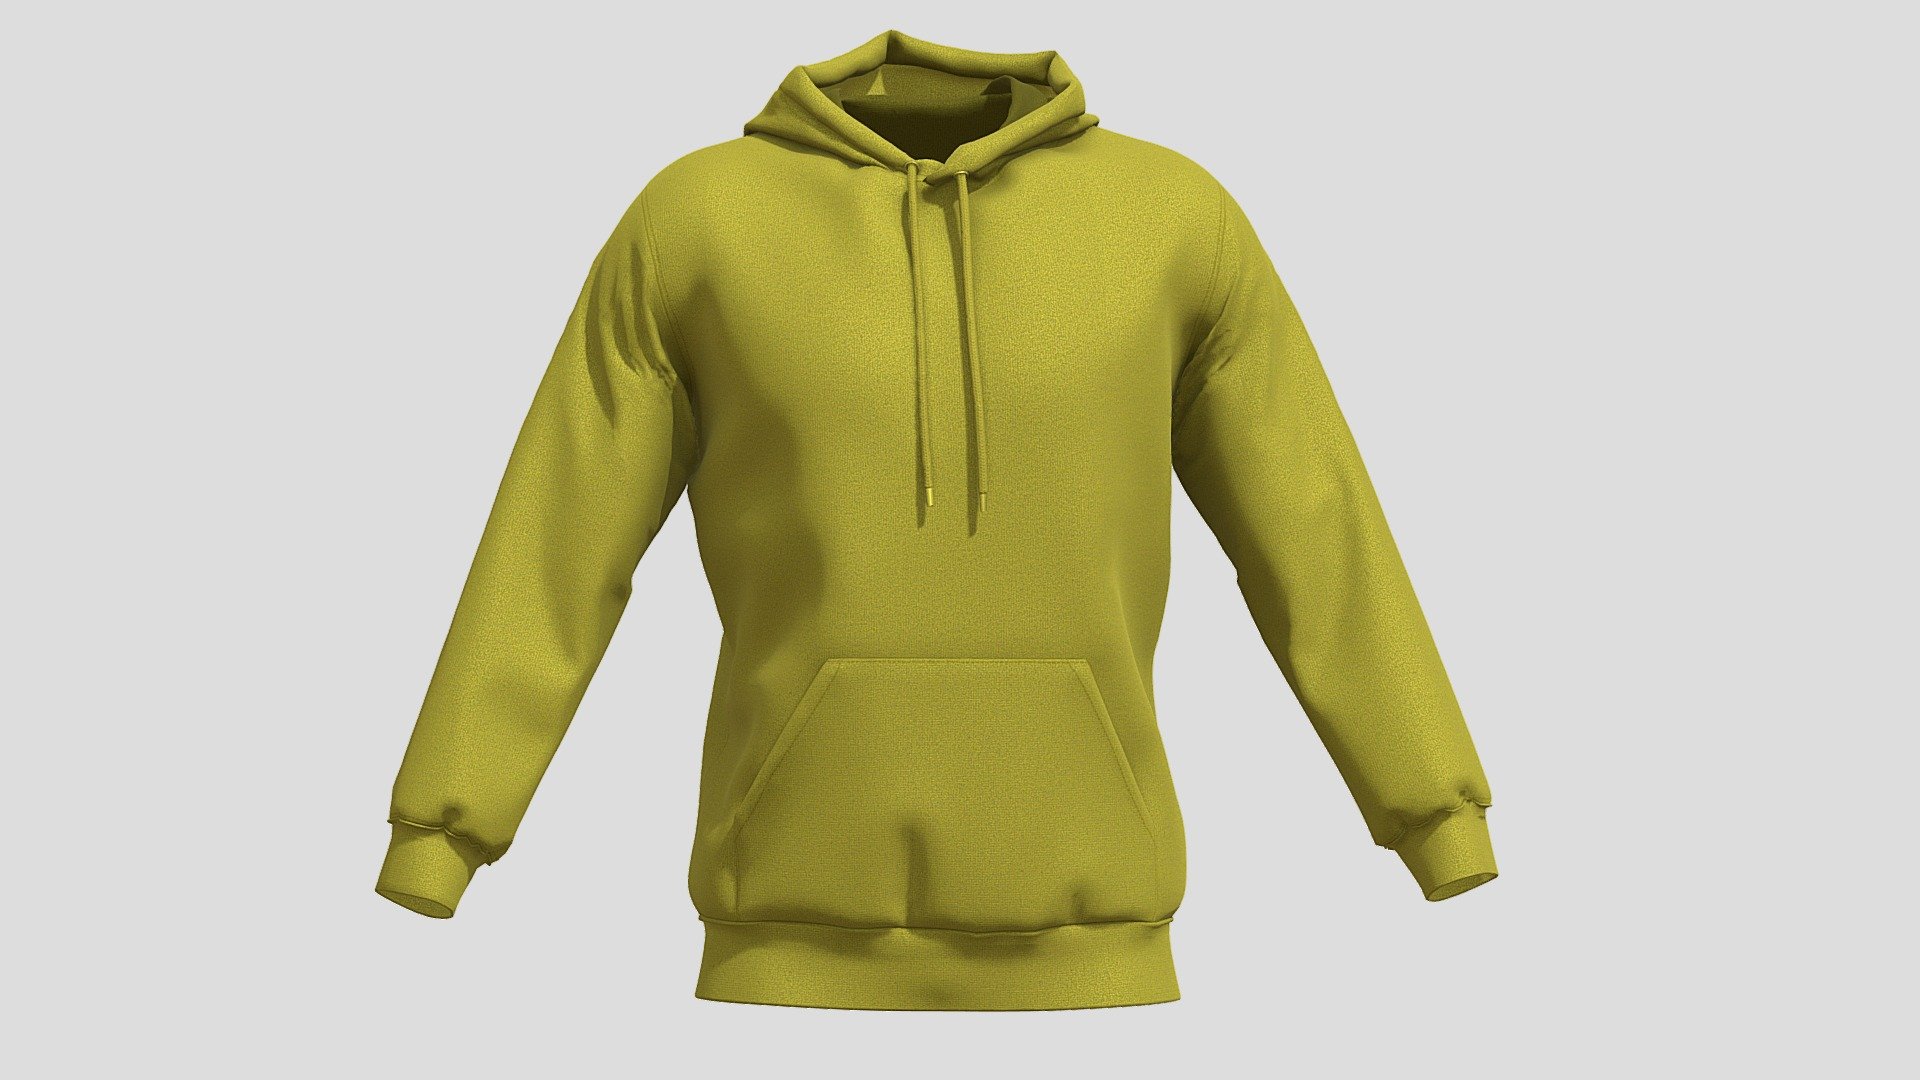 Hi, I'm Frezzy. I am leader of Cgivn studio. We are a team of talented artists working together since 2013.
If you want hire me to do 3d model please touch me at:cgivn.studio Thanks you! - Hoodie Yellow PBR Realistic - Buy Royalty Free 3D model by Frezzy (@frezzy3d) 3d model